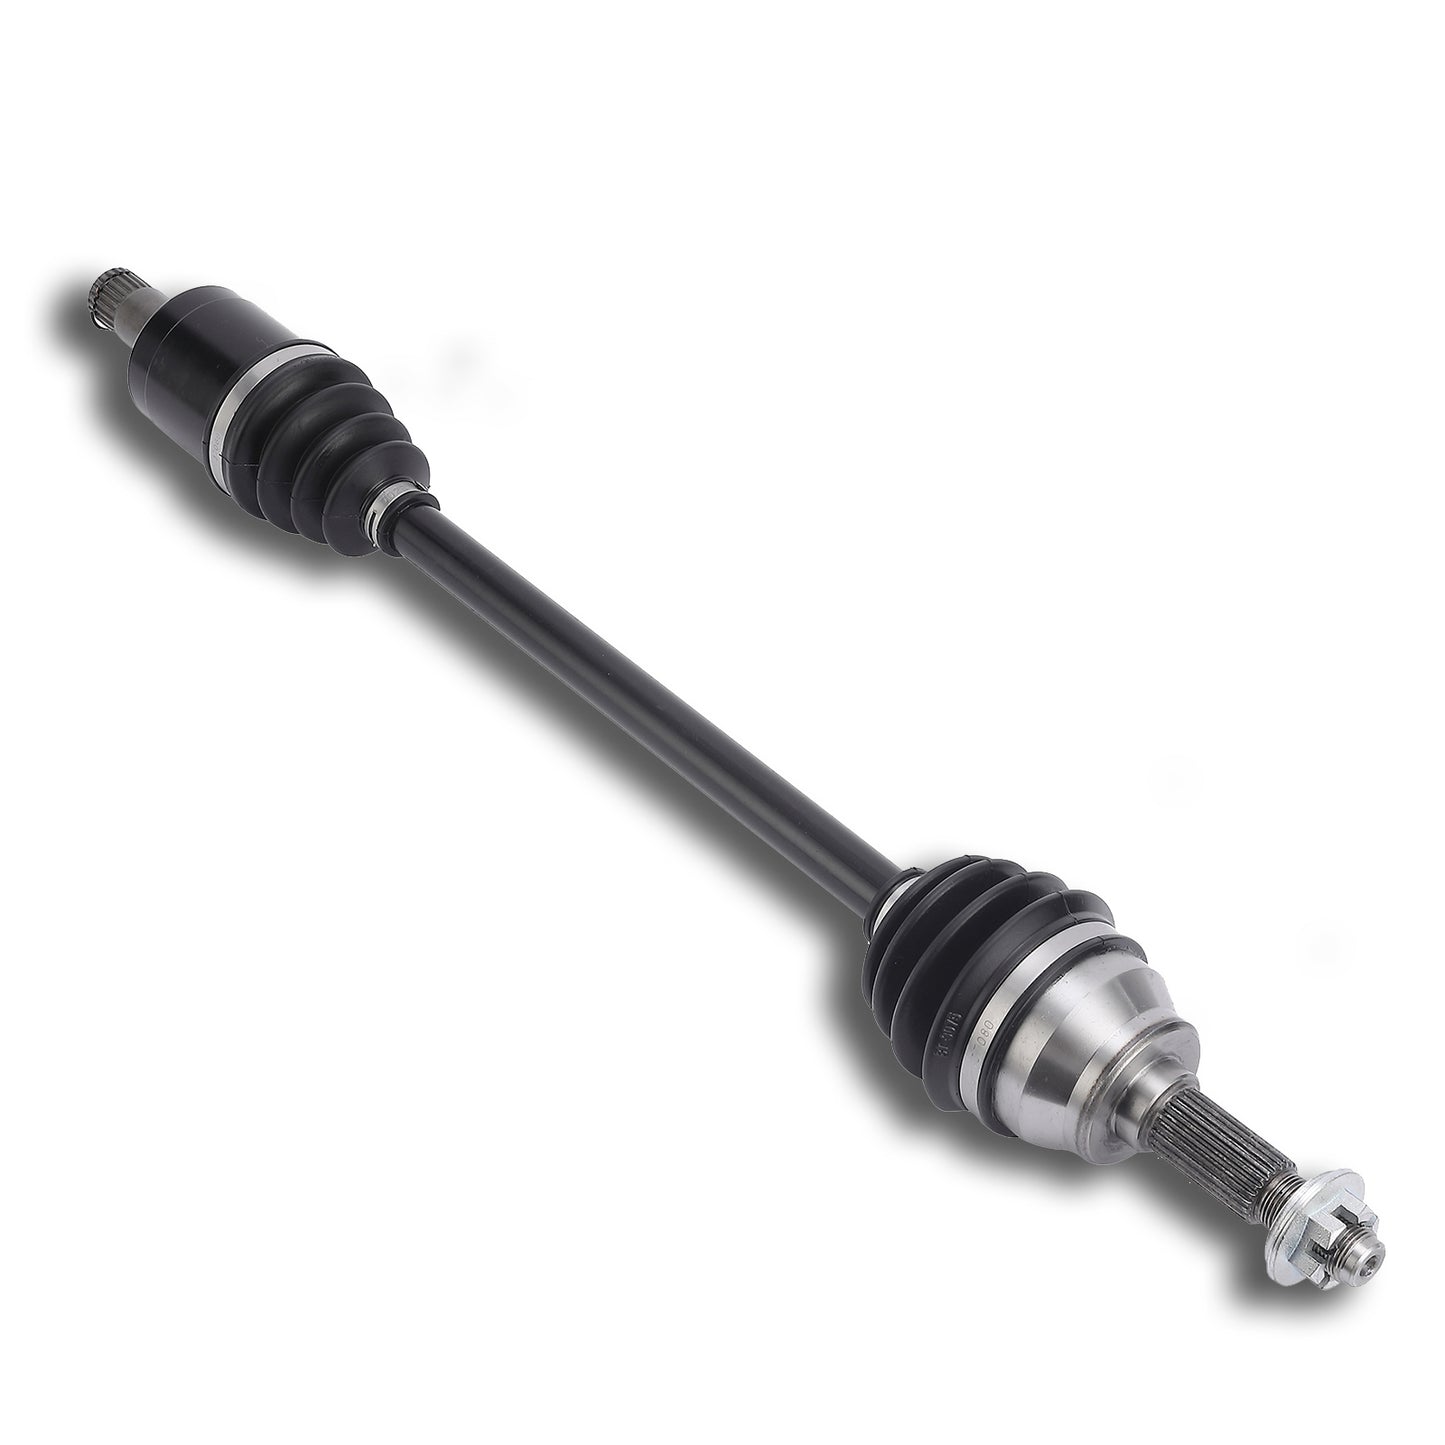 2 CAM-JD102 Front Left Drive Shaft CV Axle Compatible with JOHN DEERE Gator (2013) XUV 550, 550 S4, 850i BF AM145189 AM145326